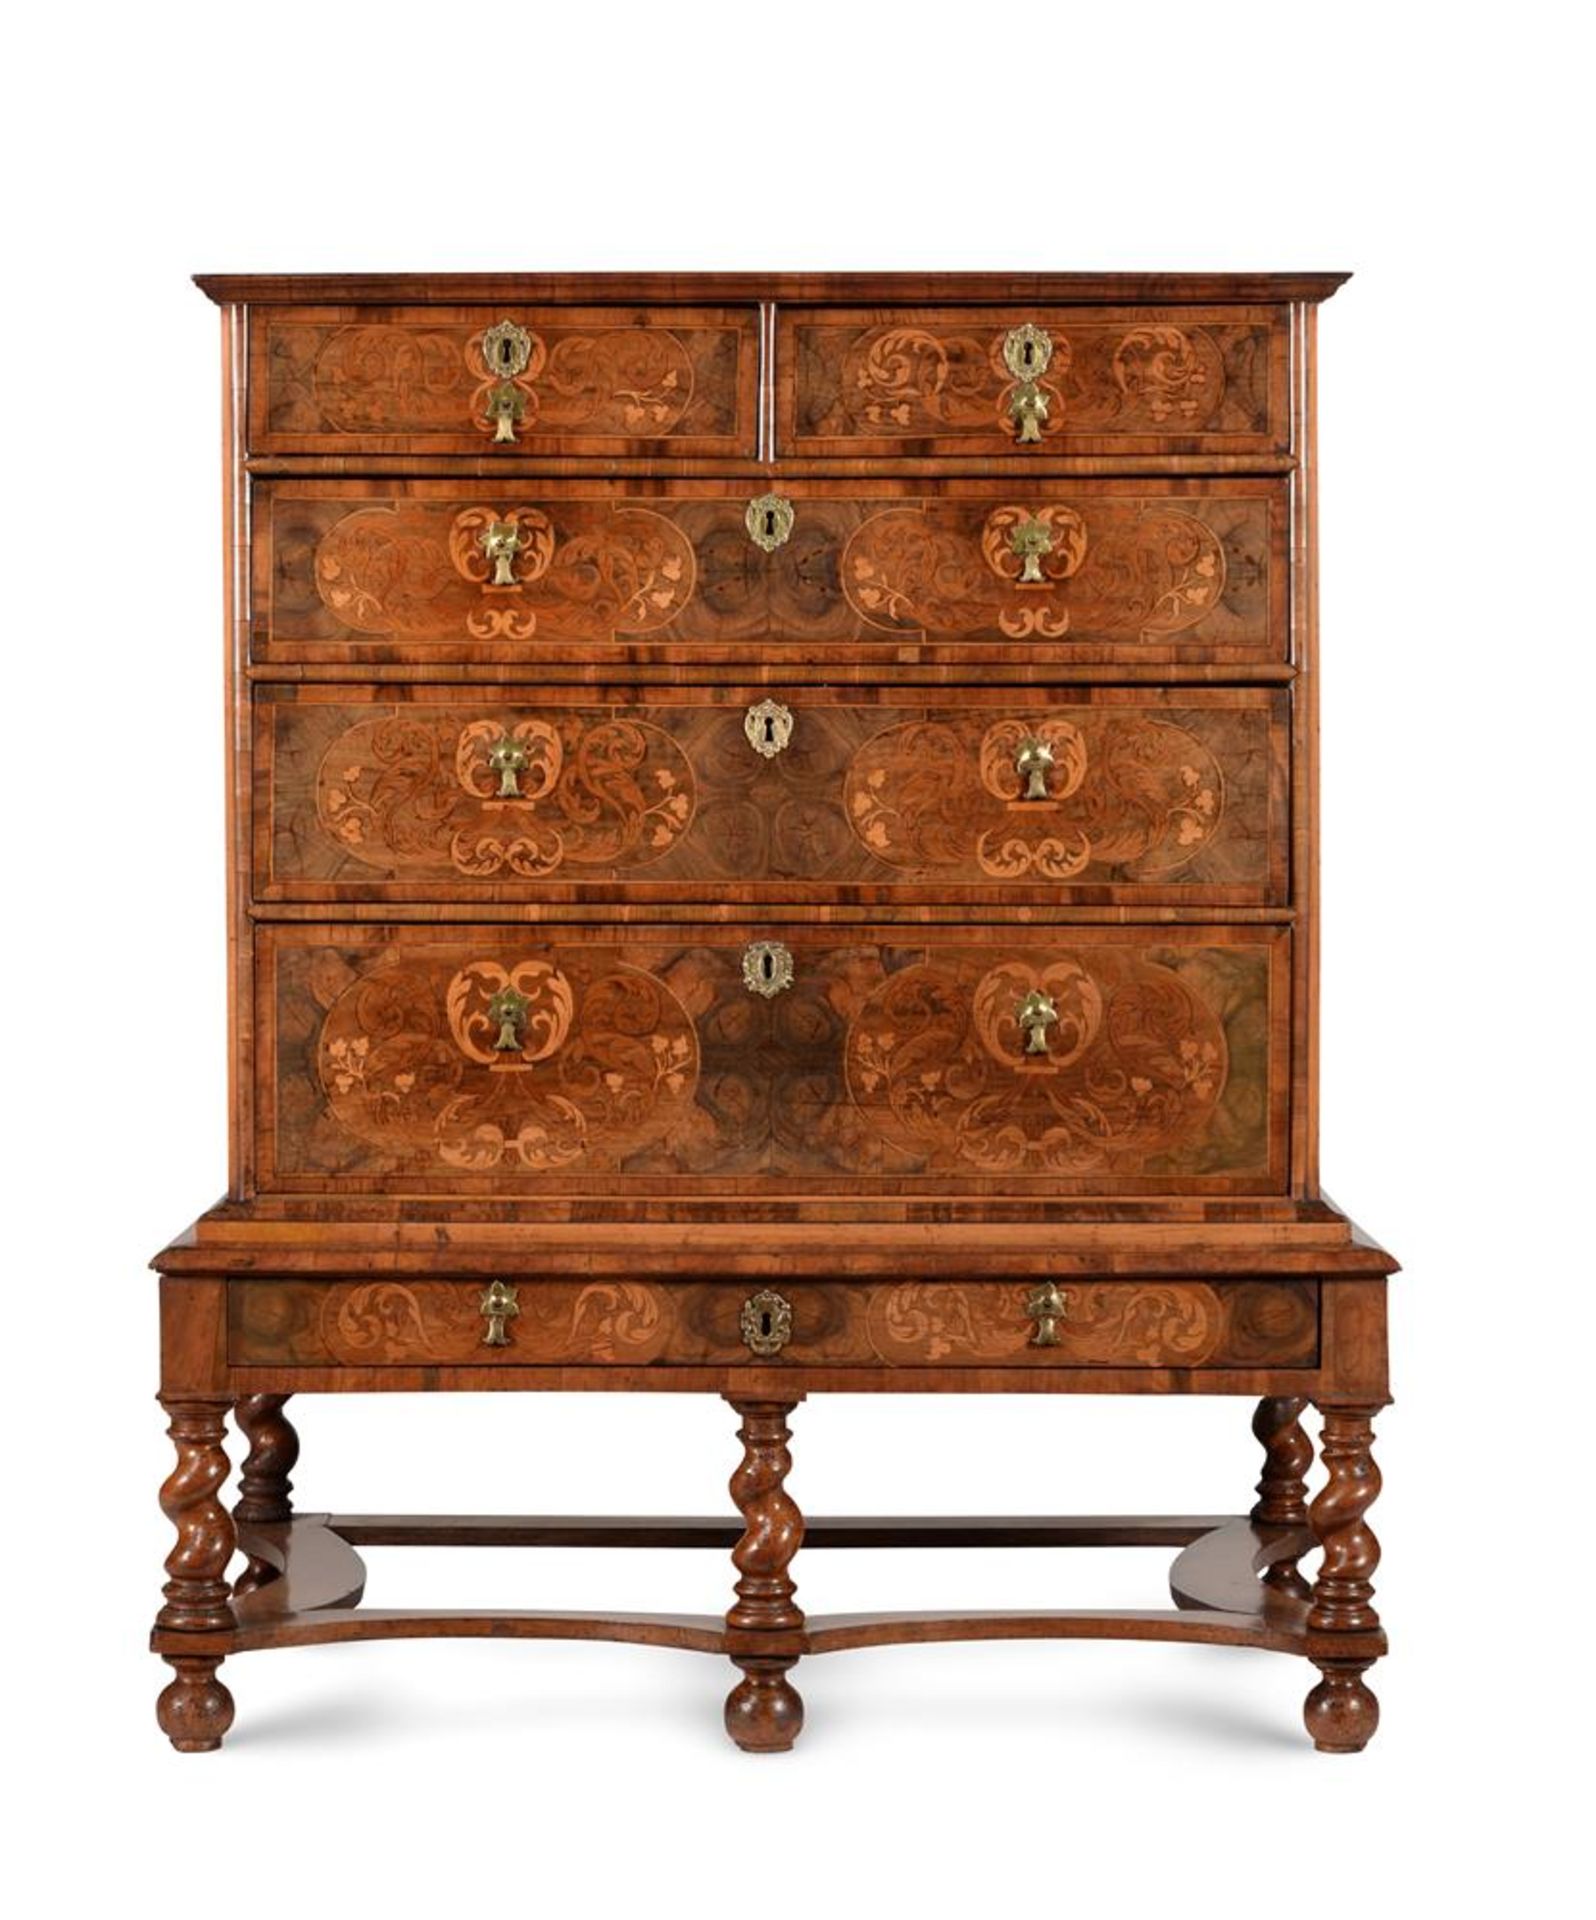 A FINE AND RARE WILLIAM & MARY WALNUT, FRUITWOOD, OLIVE-WOOD OYSTER-VENEERED CHEST ON STAND - Image 3 of 5